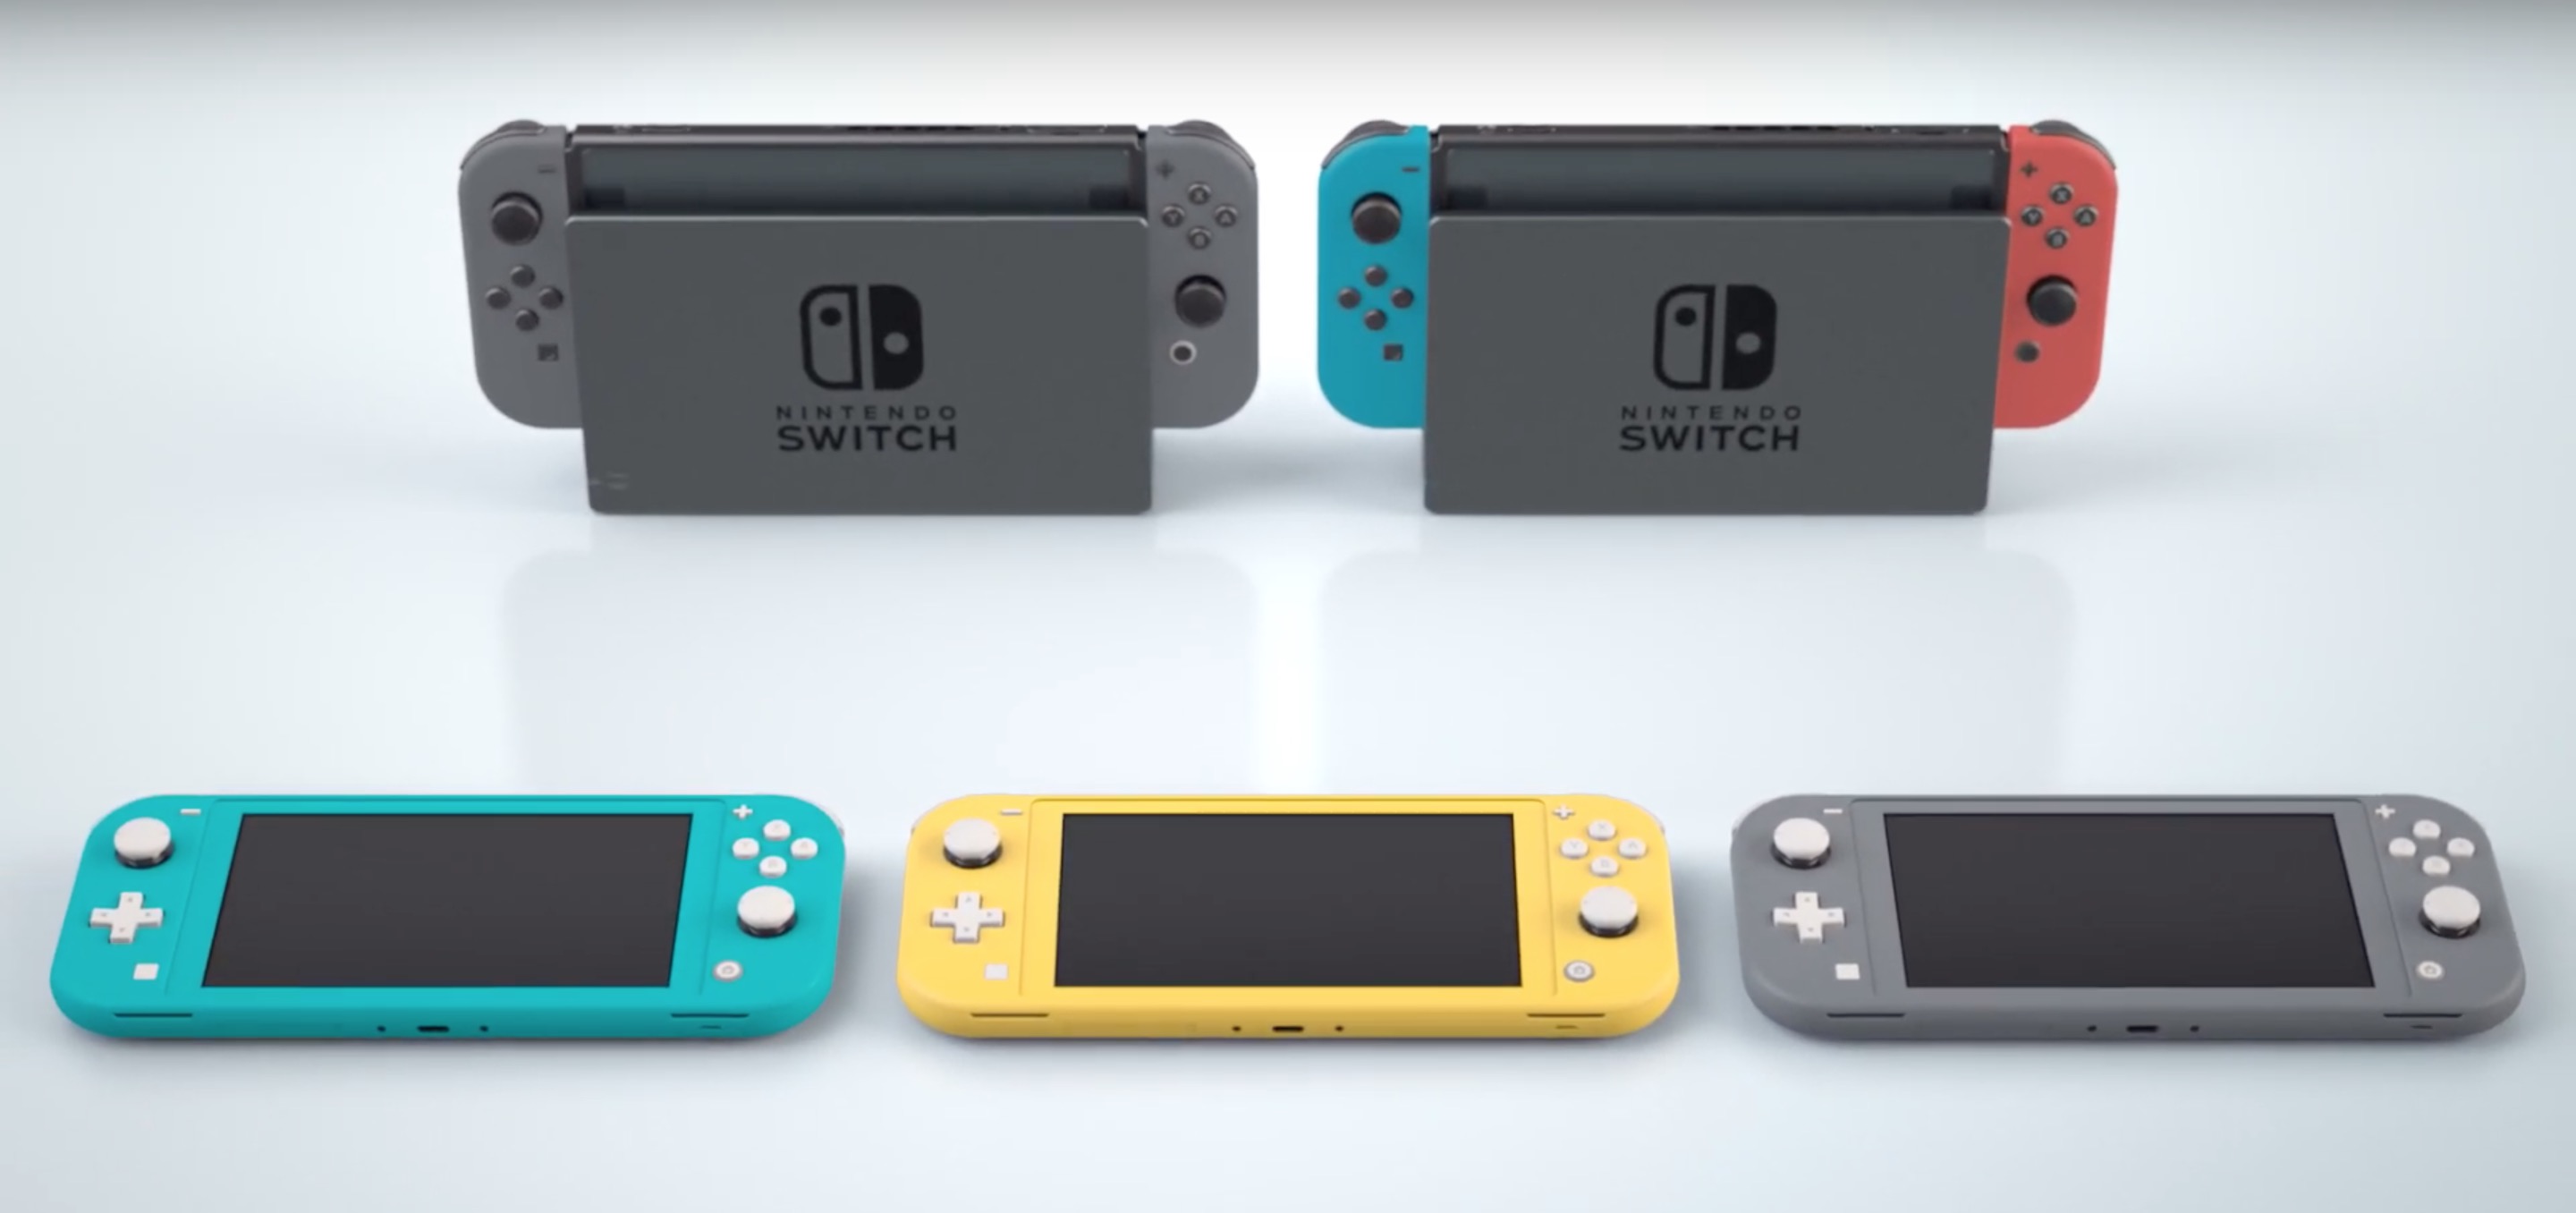 Nintendo Switch Lite Versus Nintendo Switch The Biggest Differences Between The Old And The New Model Xiaomist